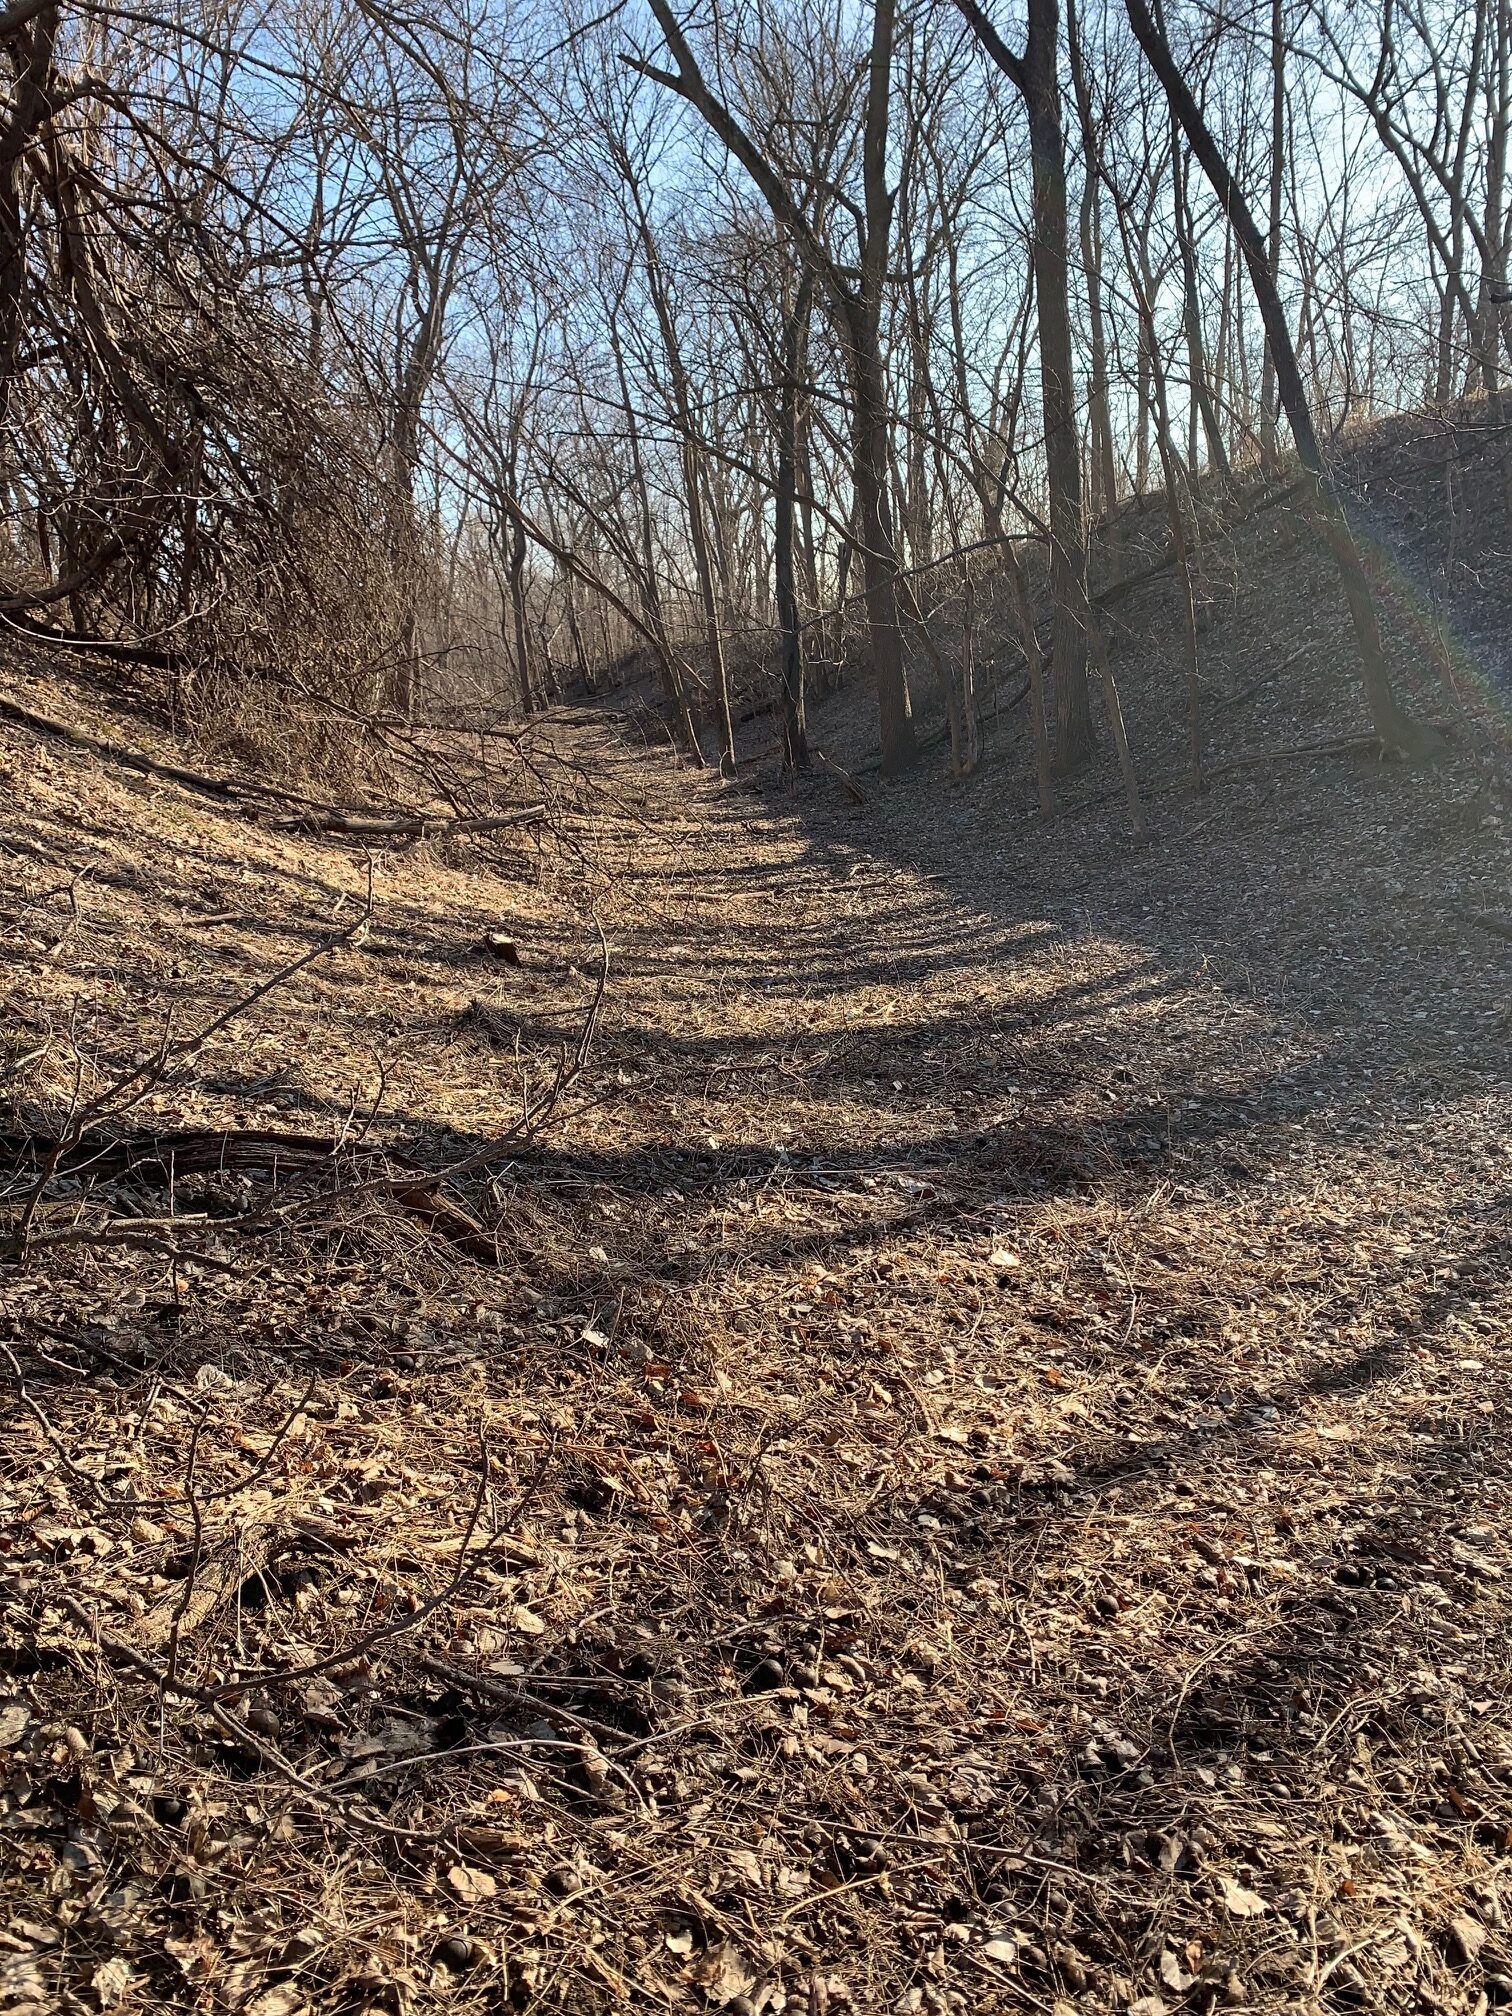 The long-forgotten ravine that once held the Newton and Northwestern Railroad